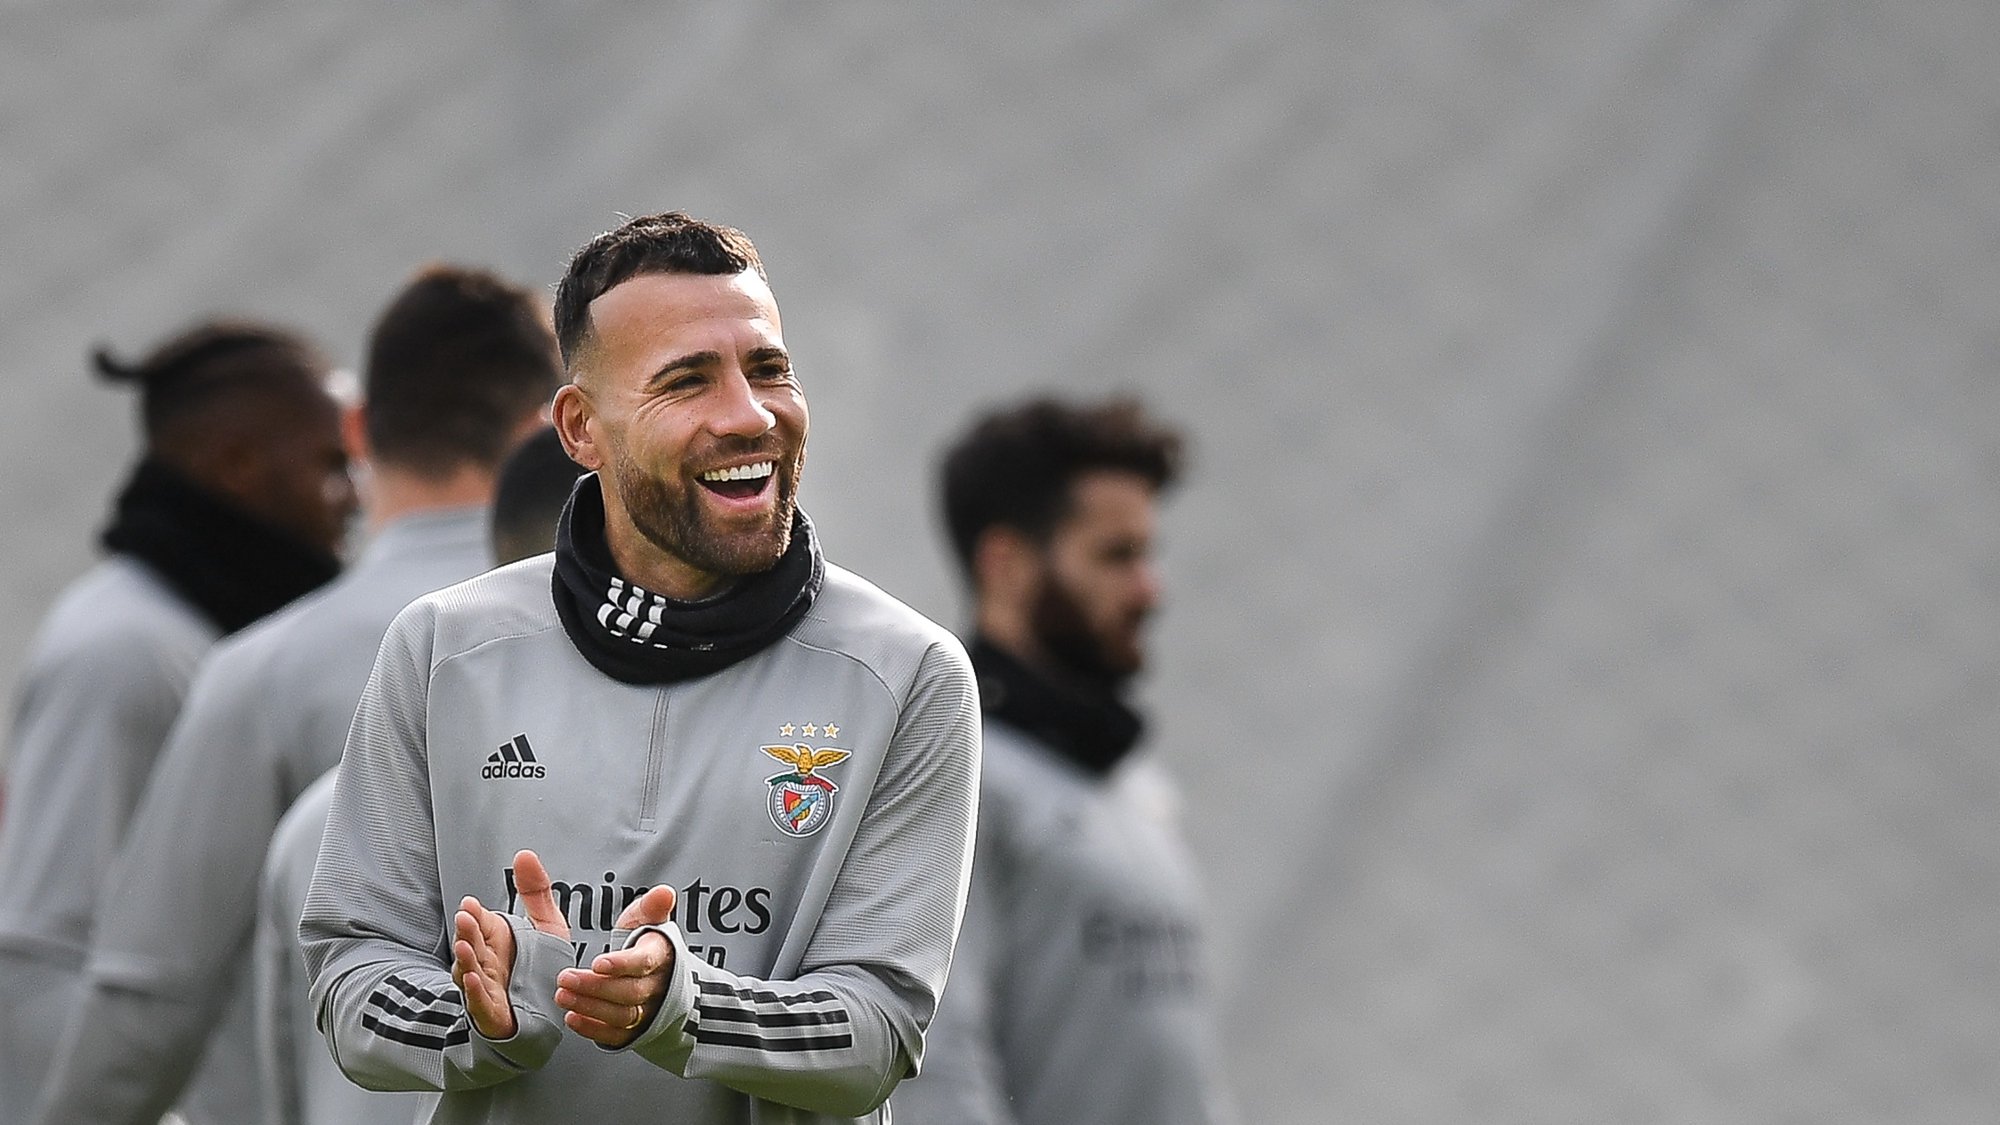 SL Benfica&#039;s Otamendi attends a training session at Benfica Campus in Seixal, near Lisbon, Portugal, 9 December 2020. SL Benfica will play against Standard Liege in their UEFA Europa League Group D match on 10 December 2020. MARIO CRUZ/LUSA